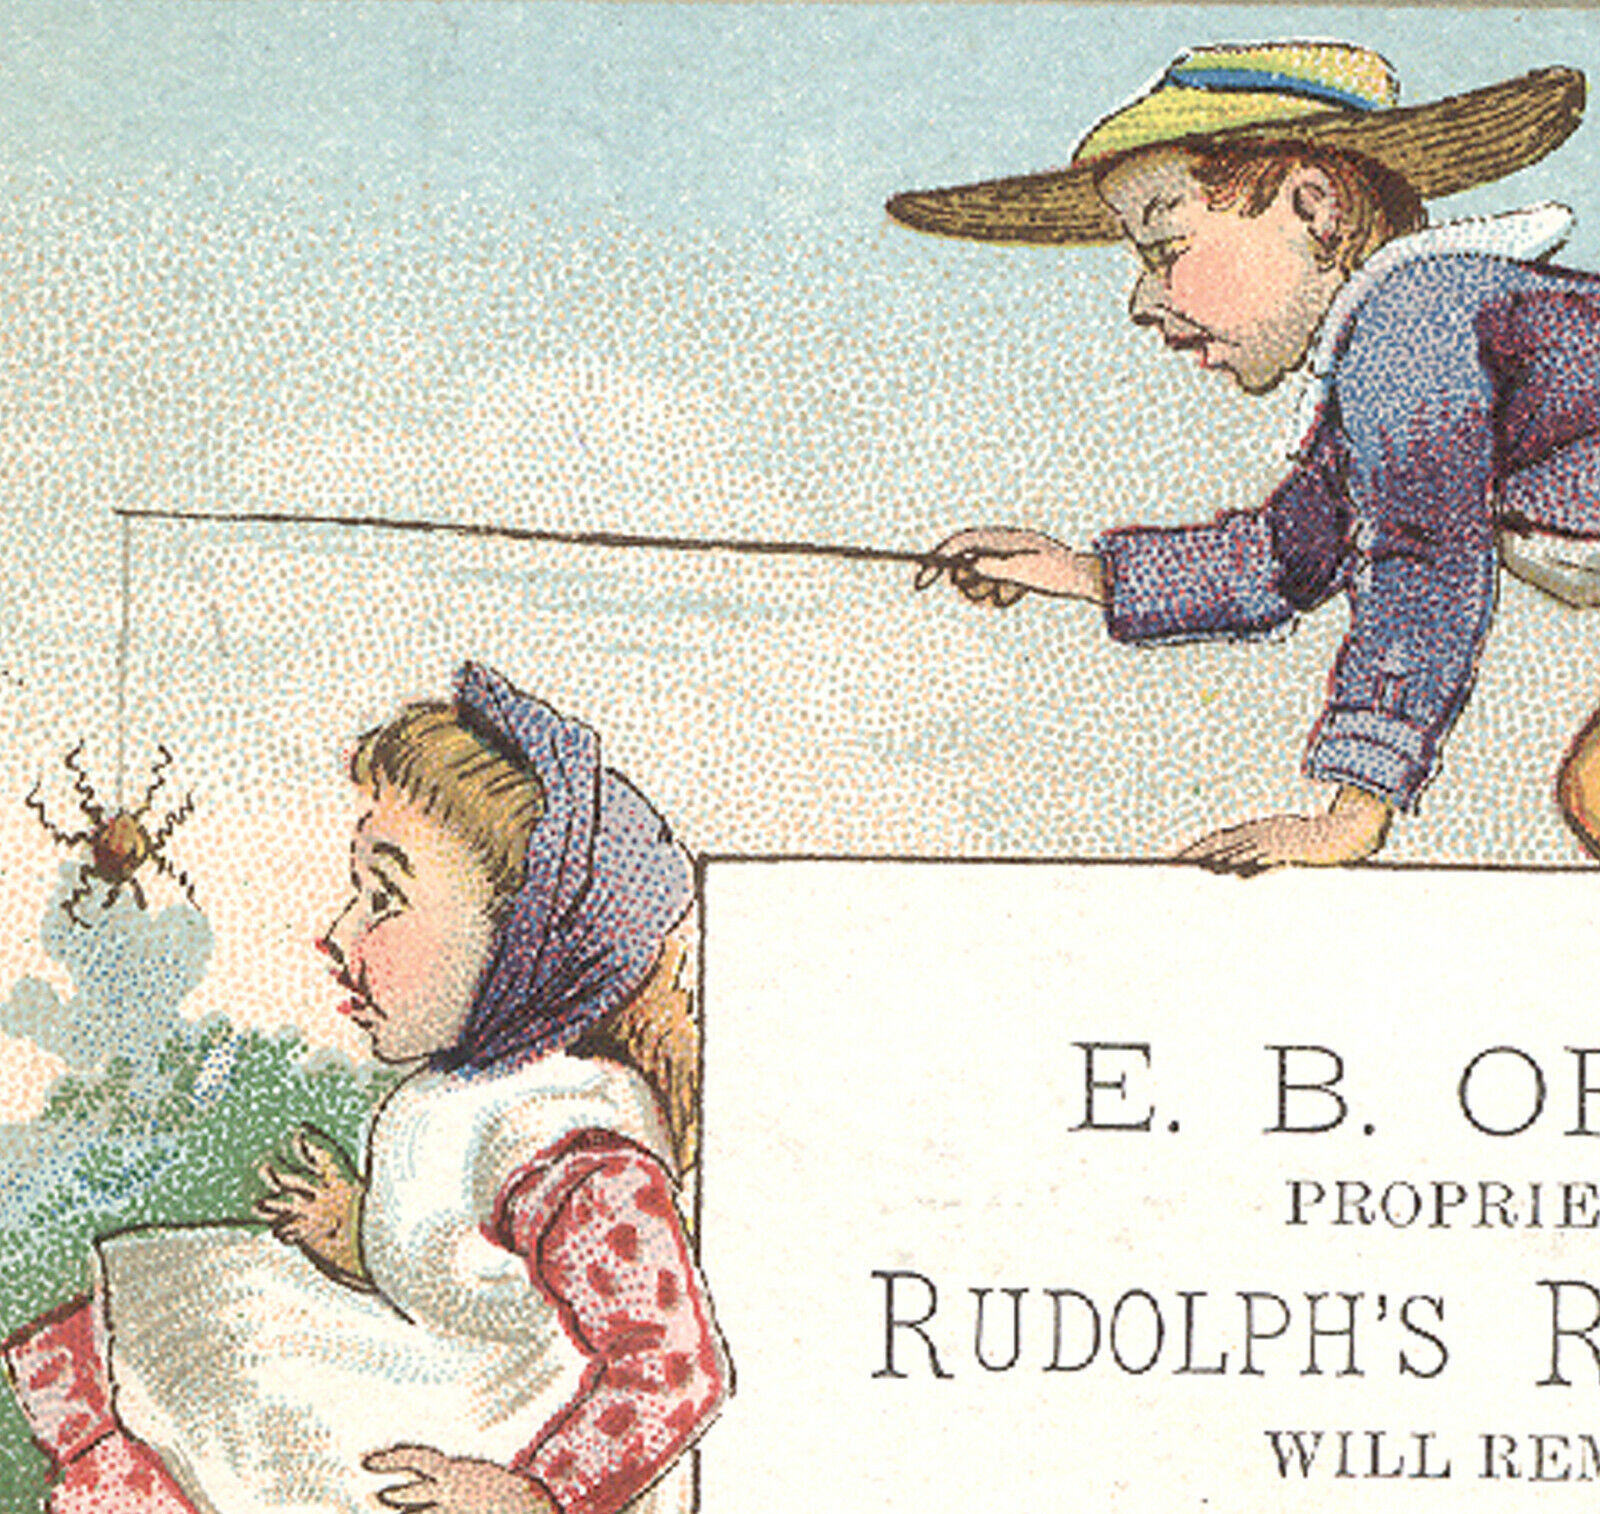 5/10/1881 RUDOLPH\'S RESTAURANT MOVED TO 200 BROADWAY TRADE CARD, BOY PRANK A601 